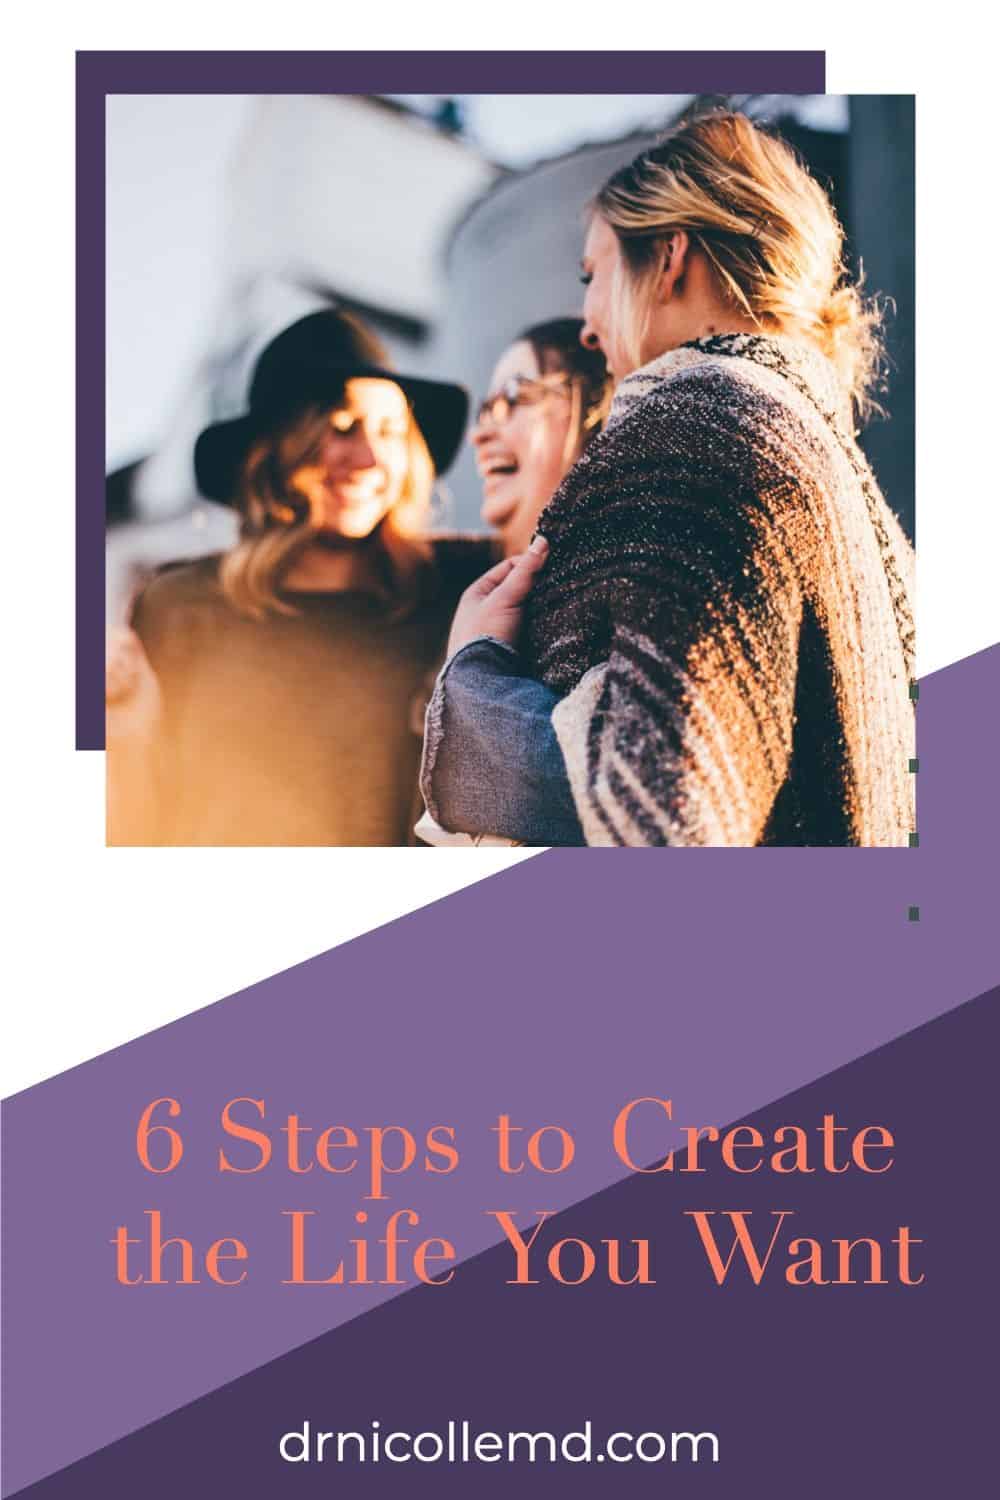 6 Steps to Create the Life You Want